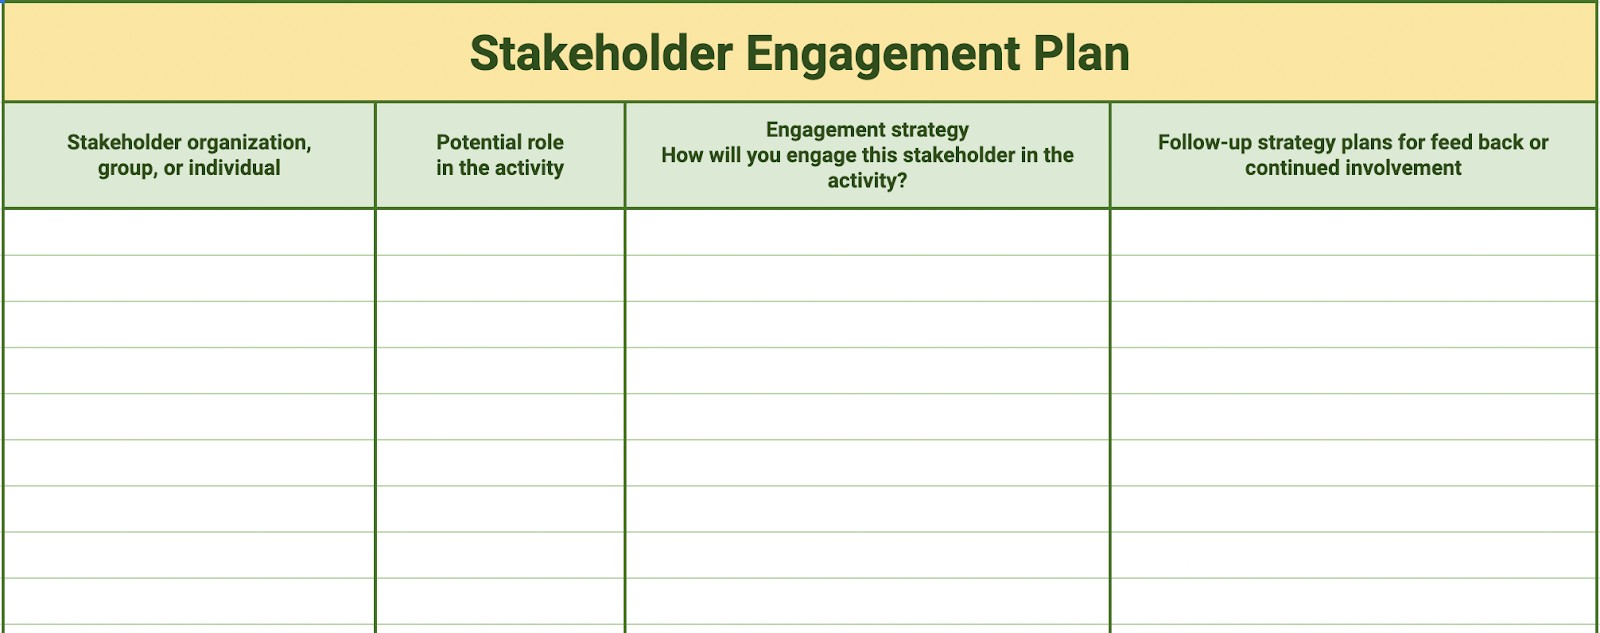 stakeholder management example, pm training